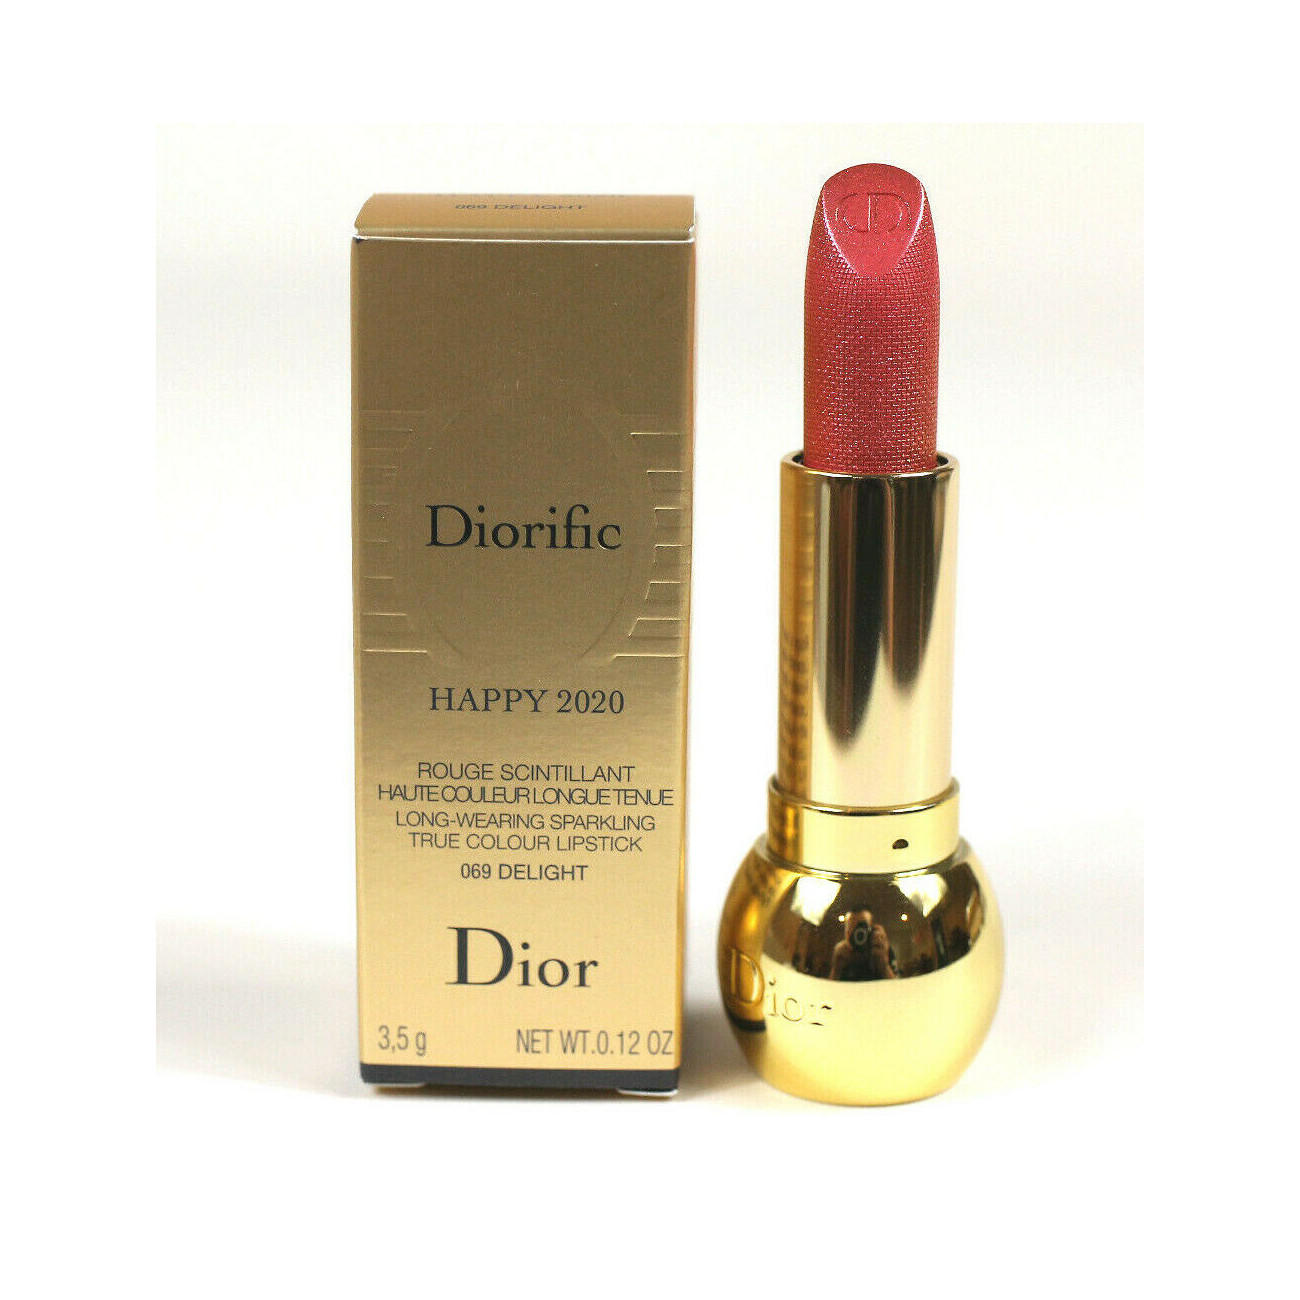 dior 636 on fire